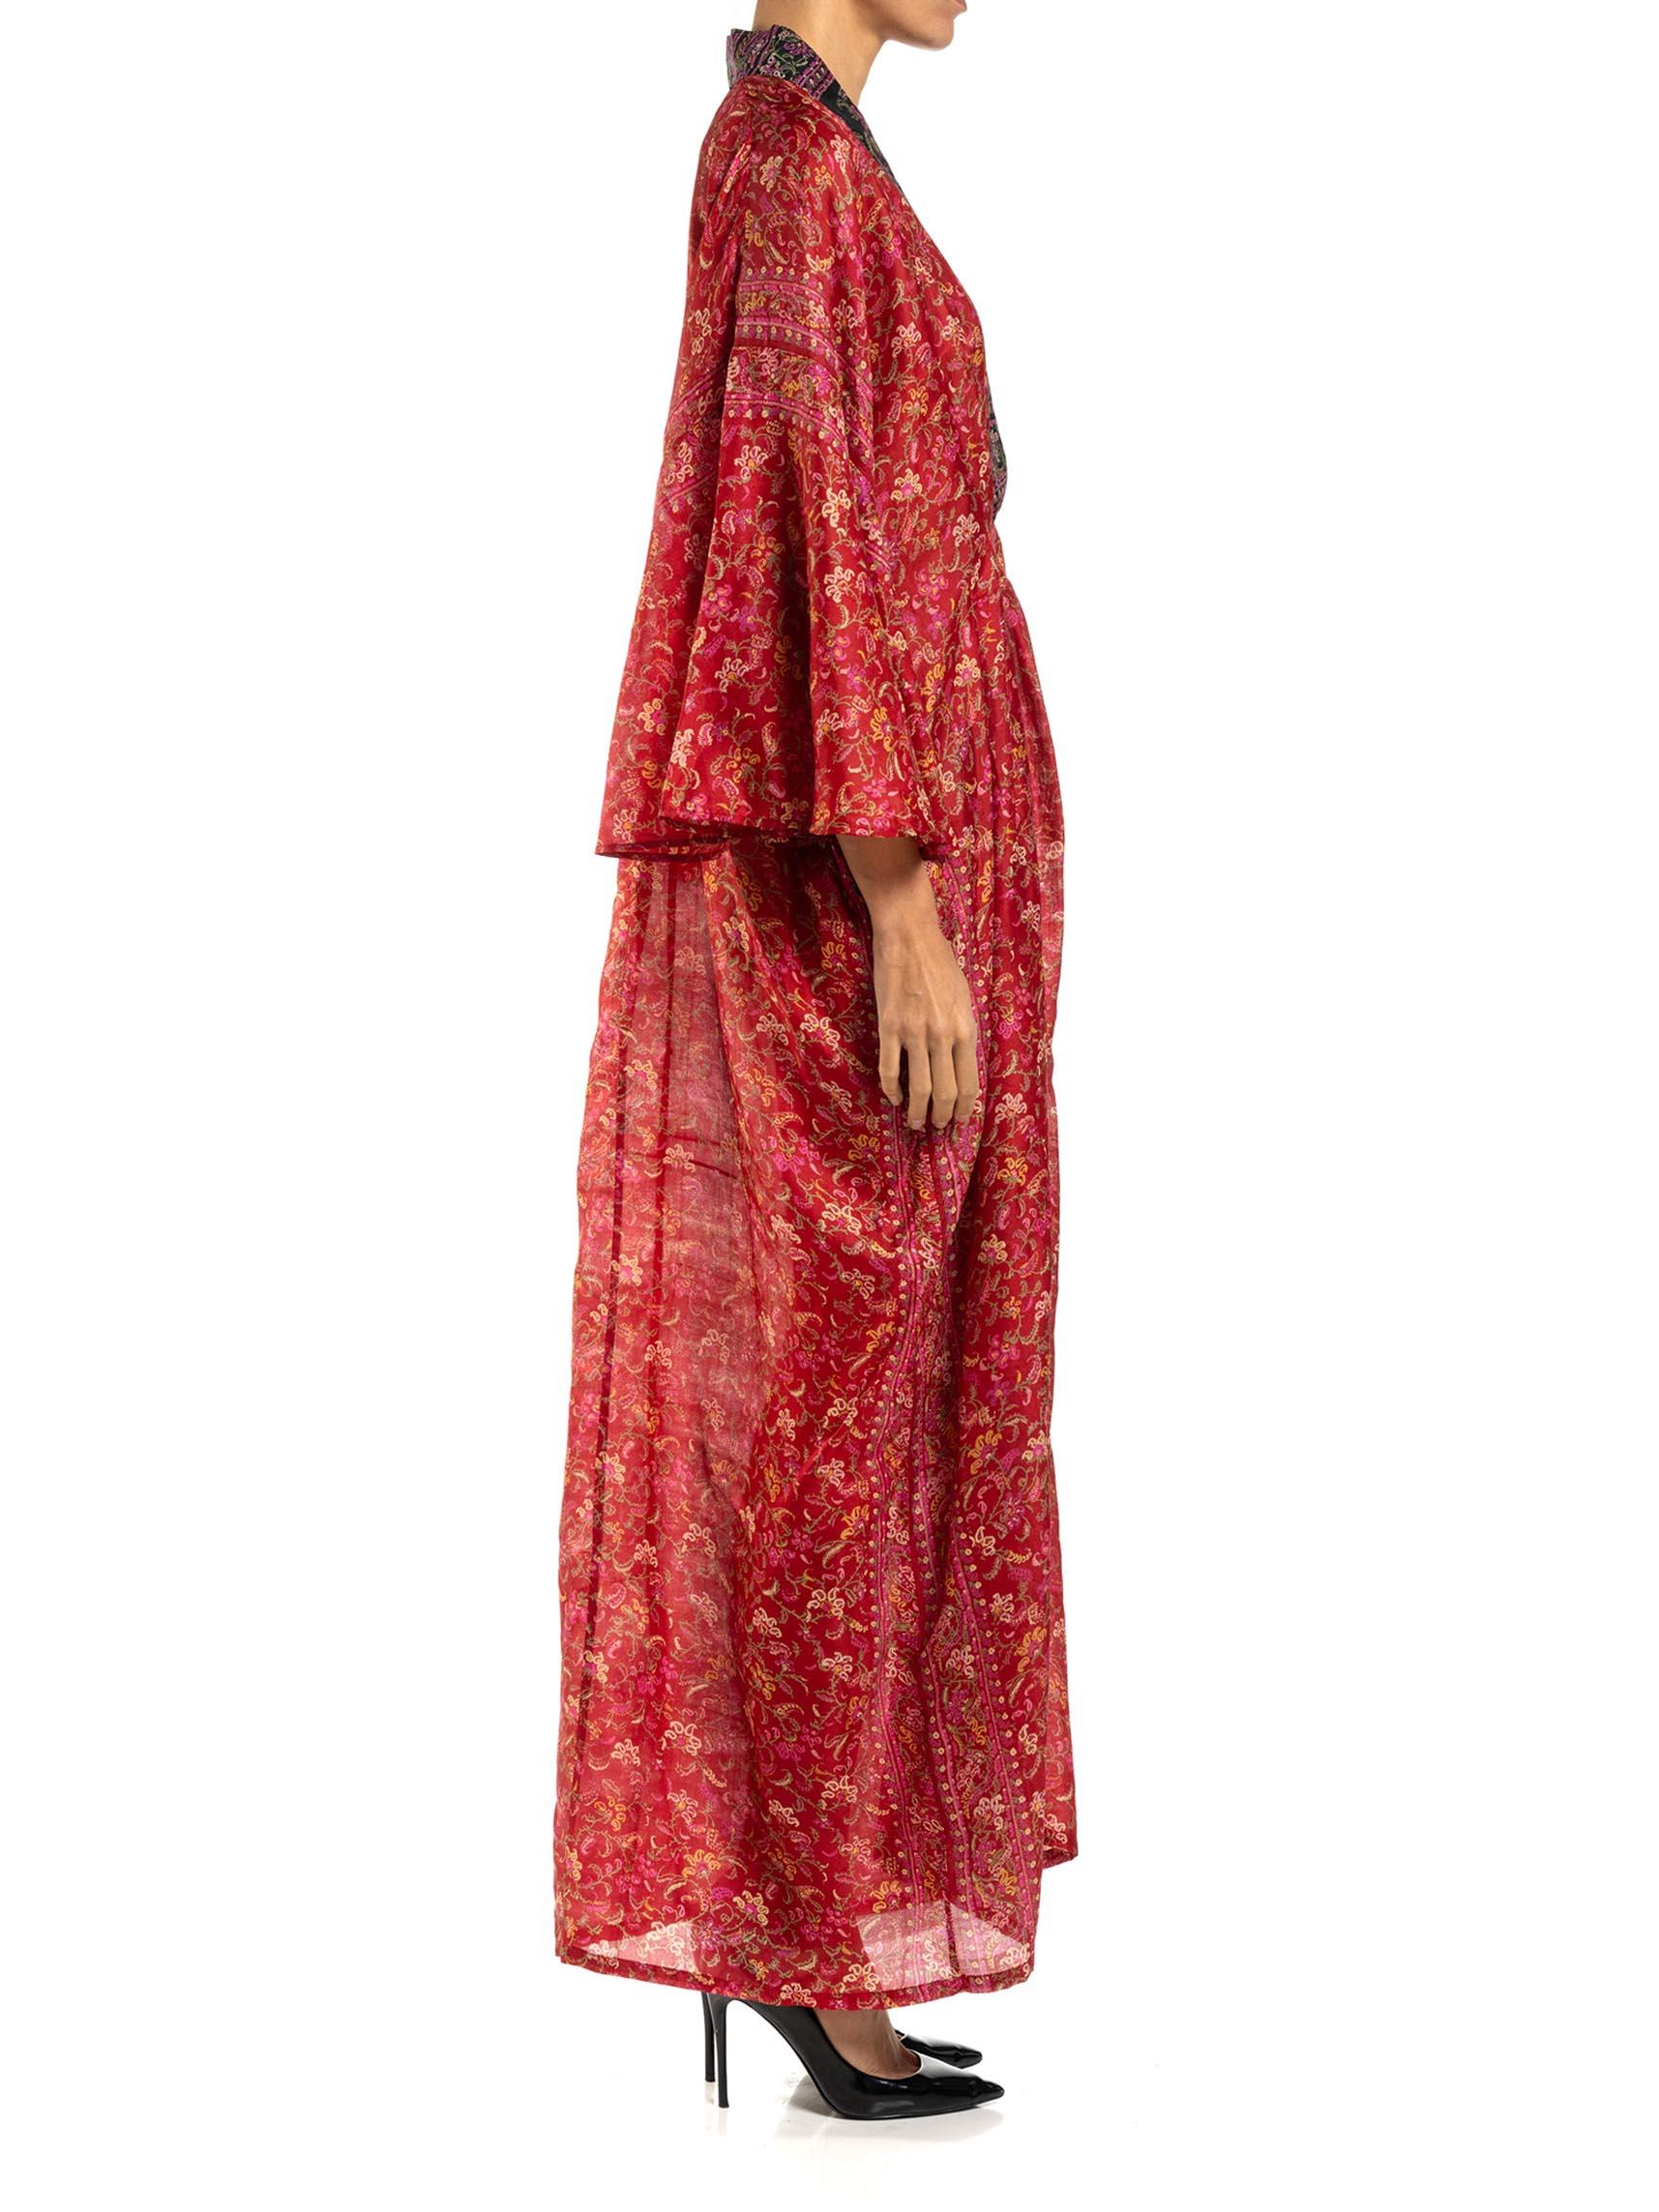 Women's MORPHEW COLLECTION Red & Black Paisley Silk Floral Kaftan Made From Vintage Sari For Sale